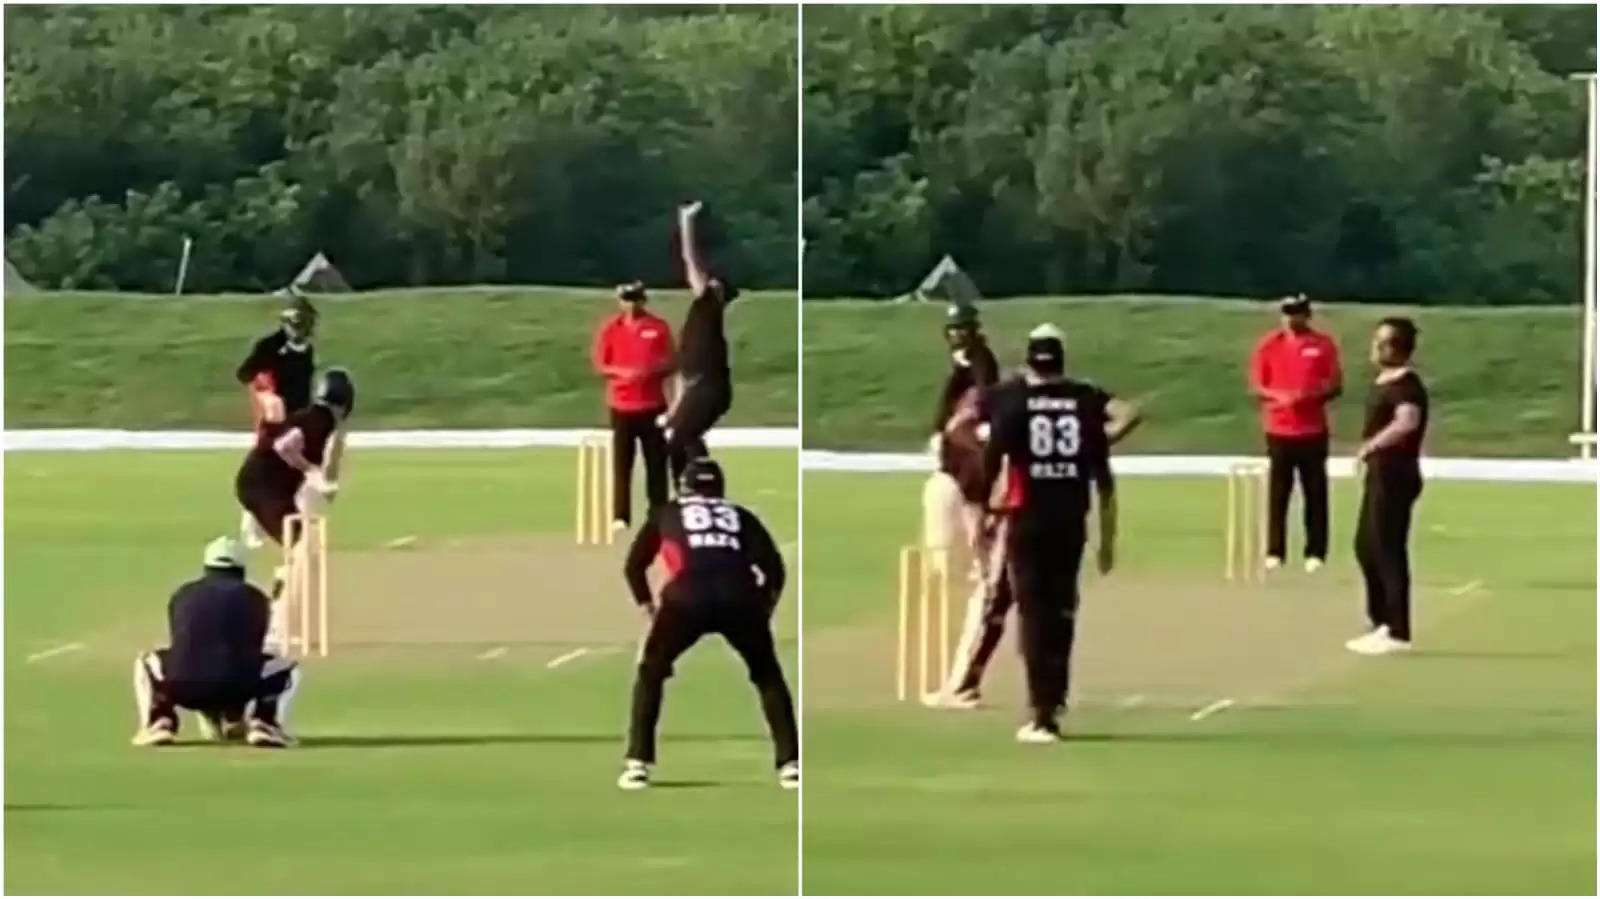 WATCH: Shoaib Akhtar rewinds the clock; shares video of steaming in at Islamabad club